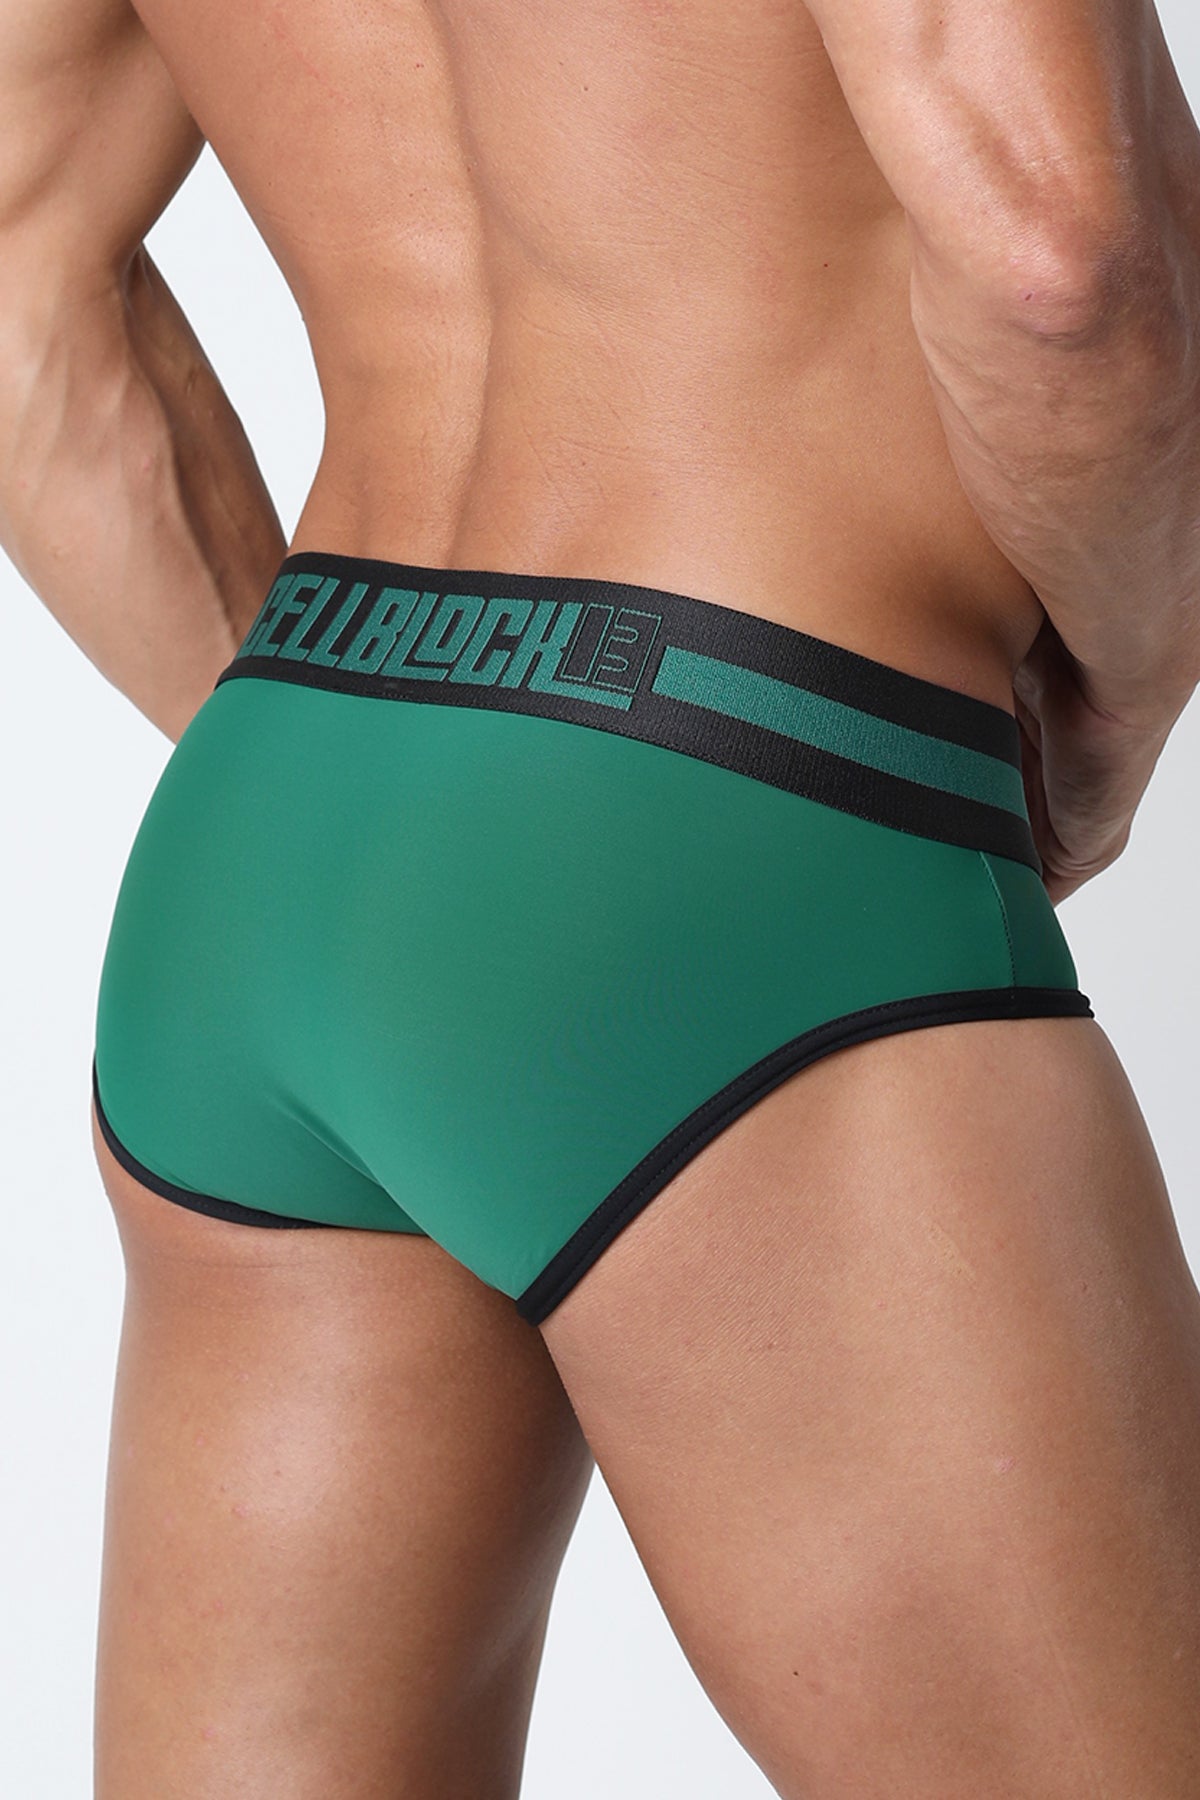 Cell Block 13 Halfback Mesh Pouch Brief Green CBU271-GRN at